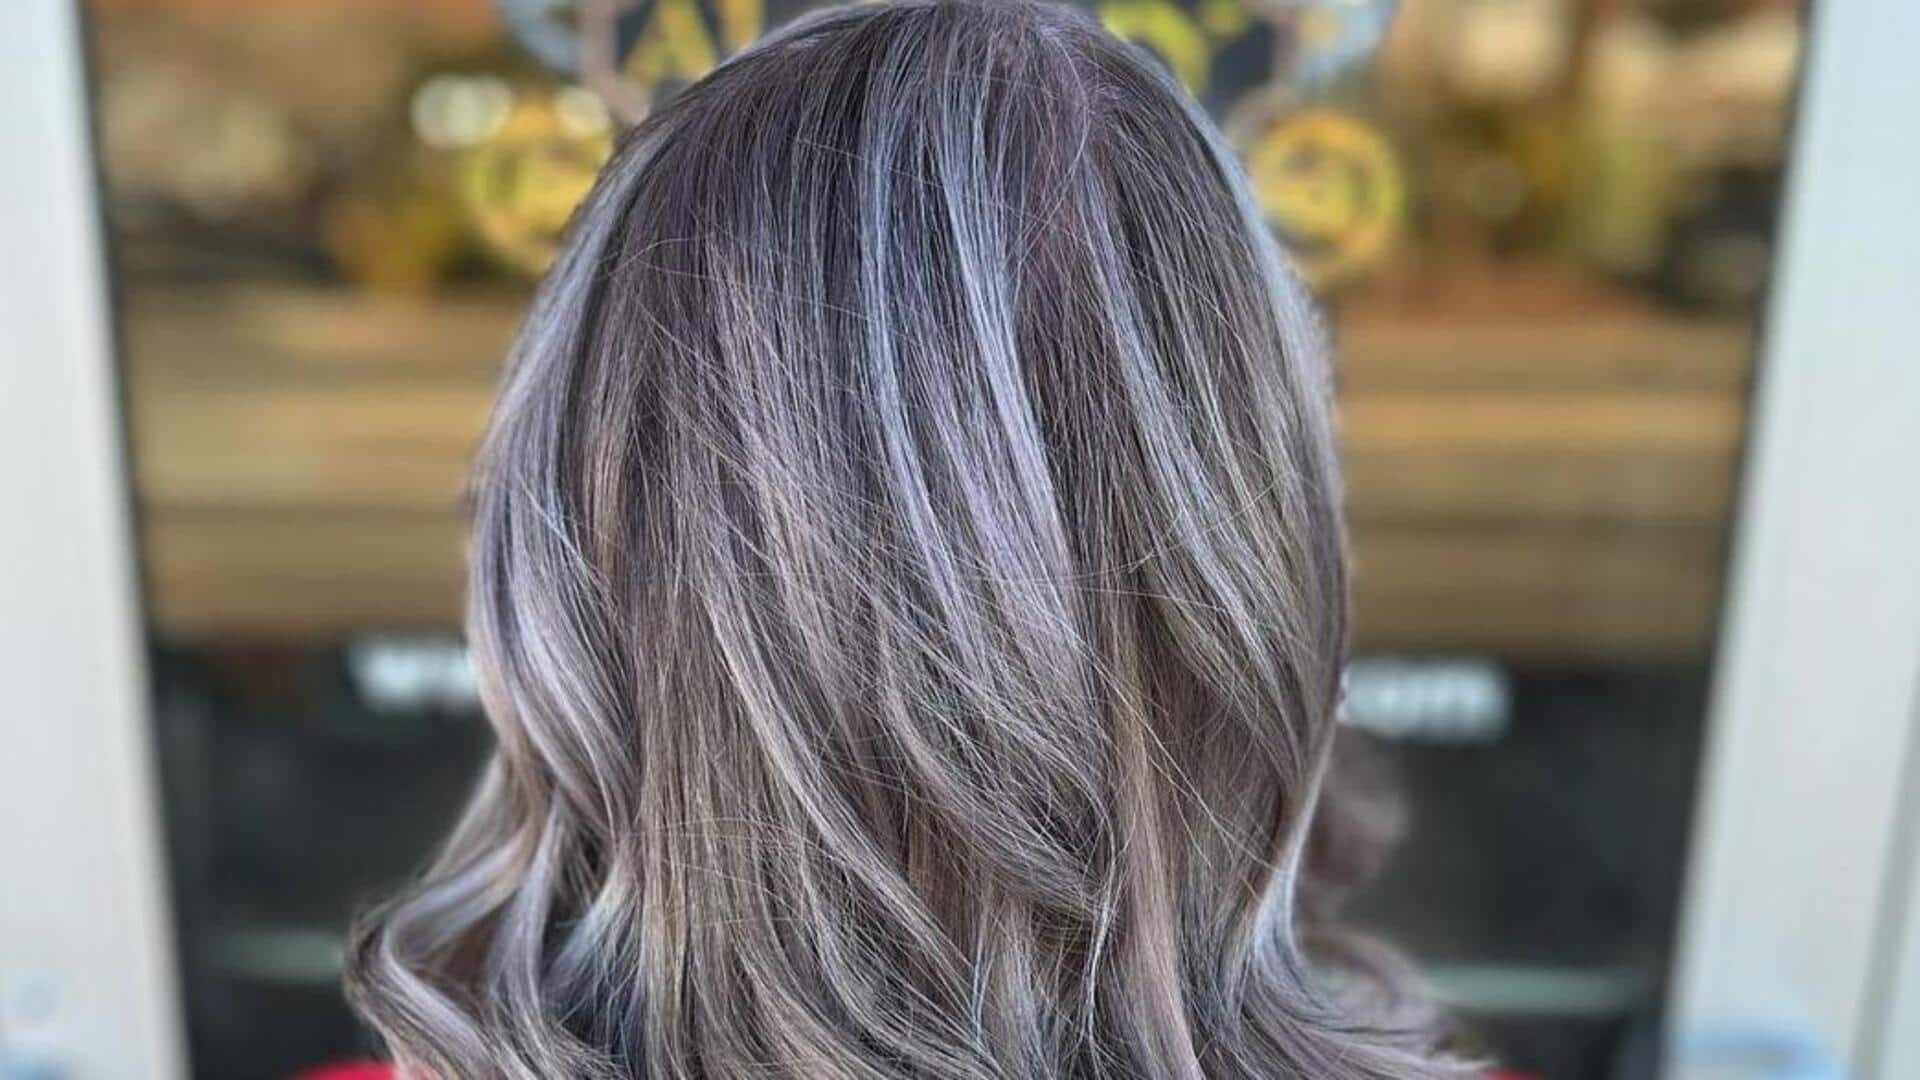 Gray blending: Exploring the hair color trend